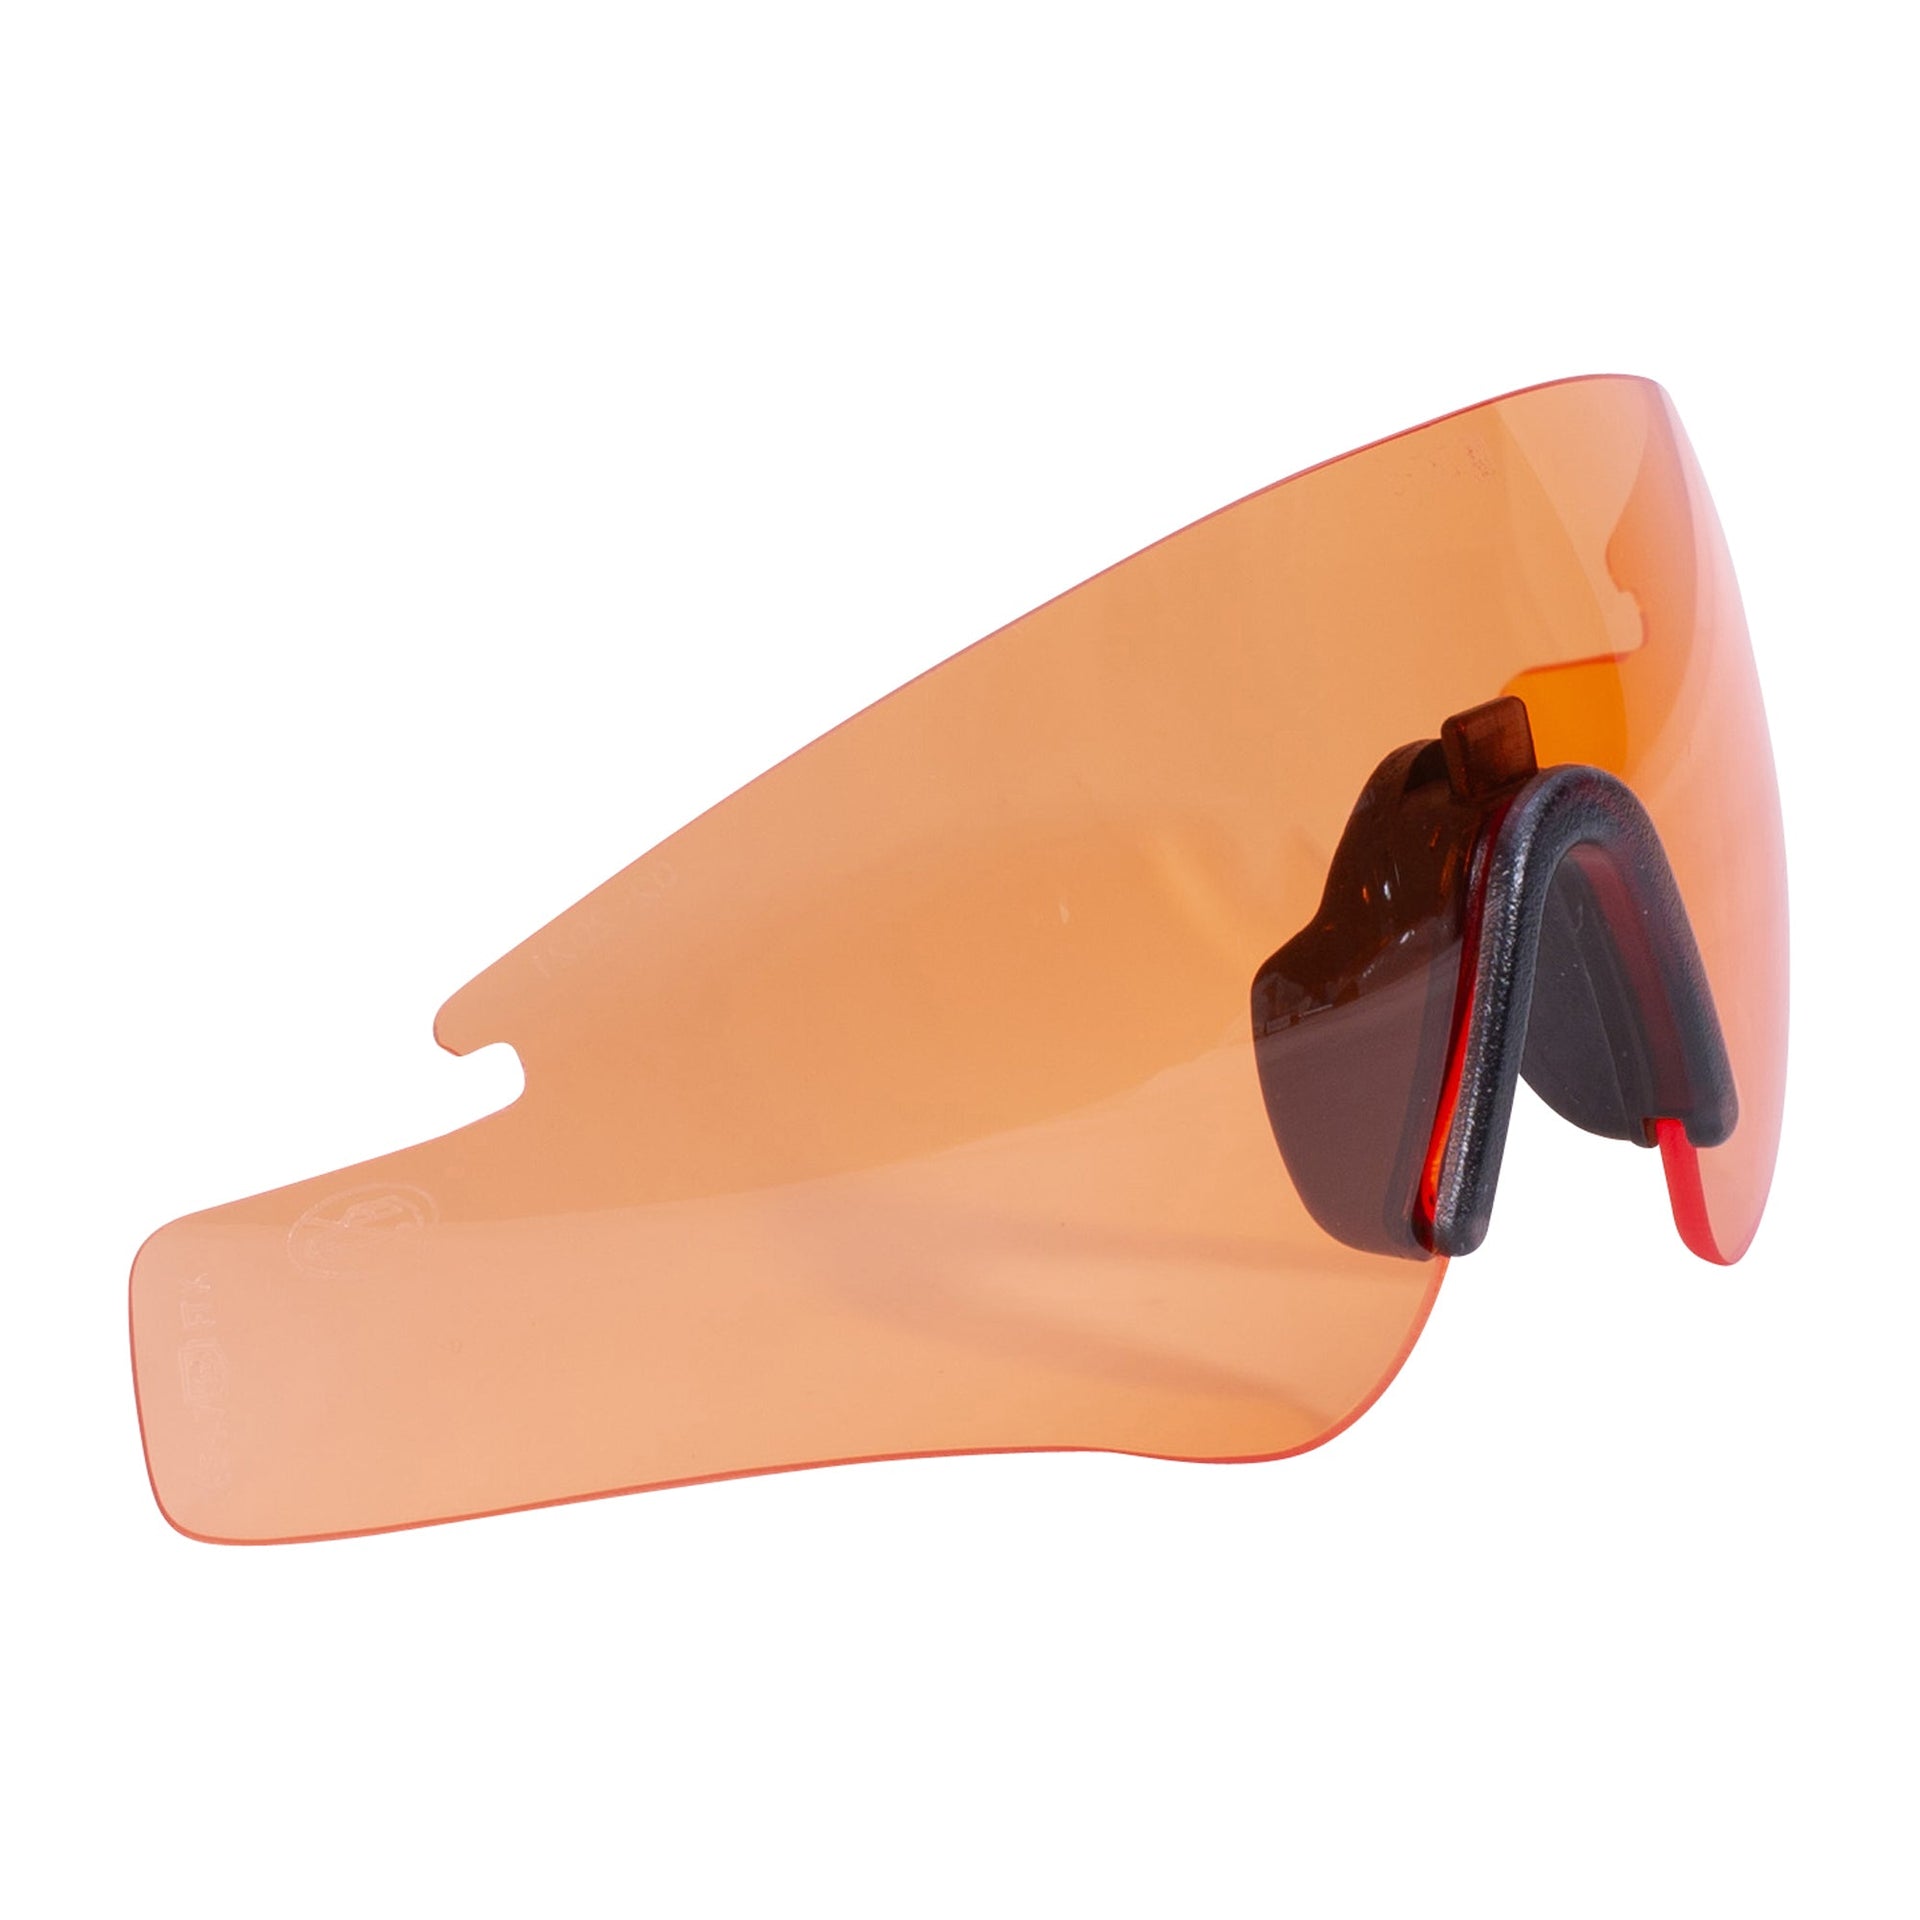 Replacement Lens Sawfly Max-Wrap large orange